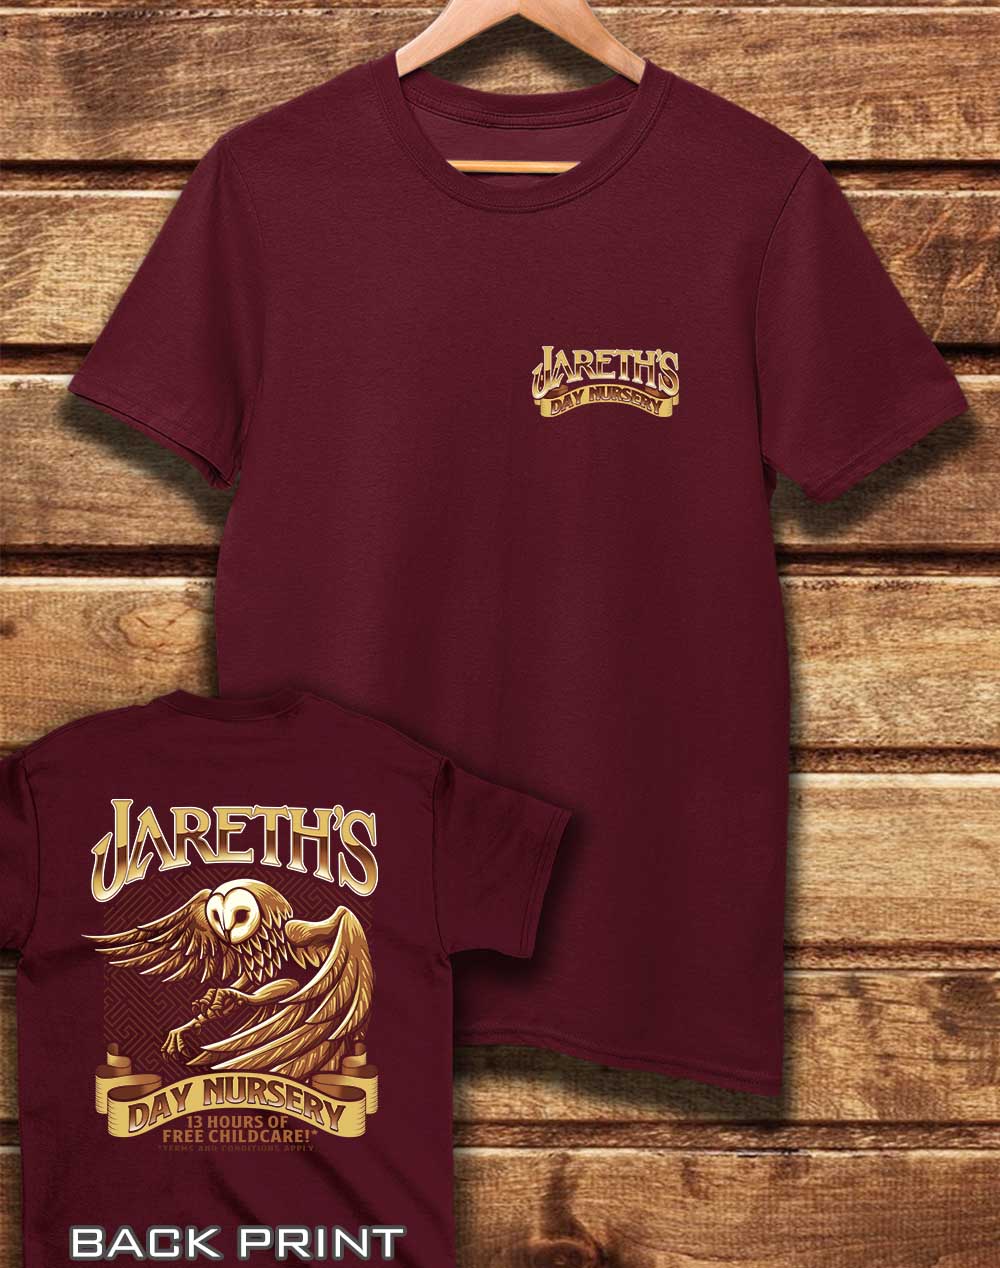 Burgundy - DELUXE Jareth's Day Nursery with Back Print Organic Cotton T-Shirt